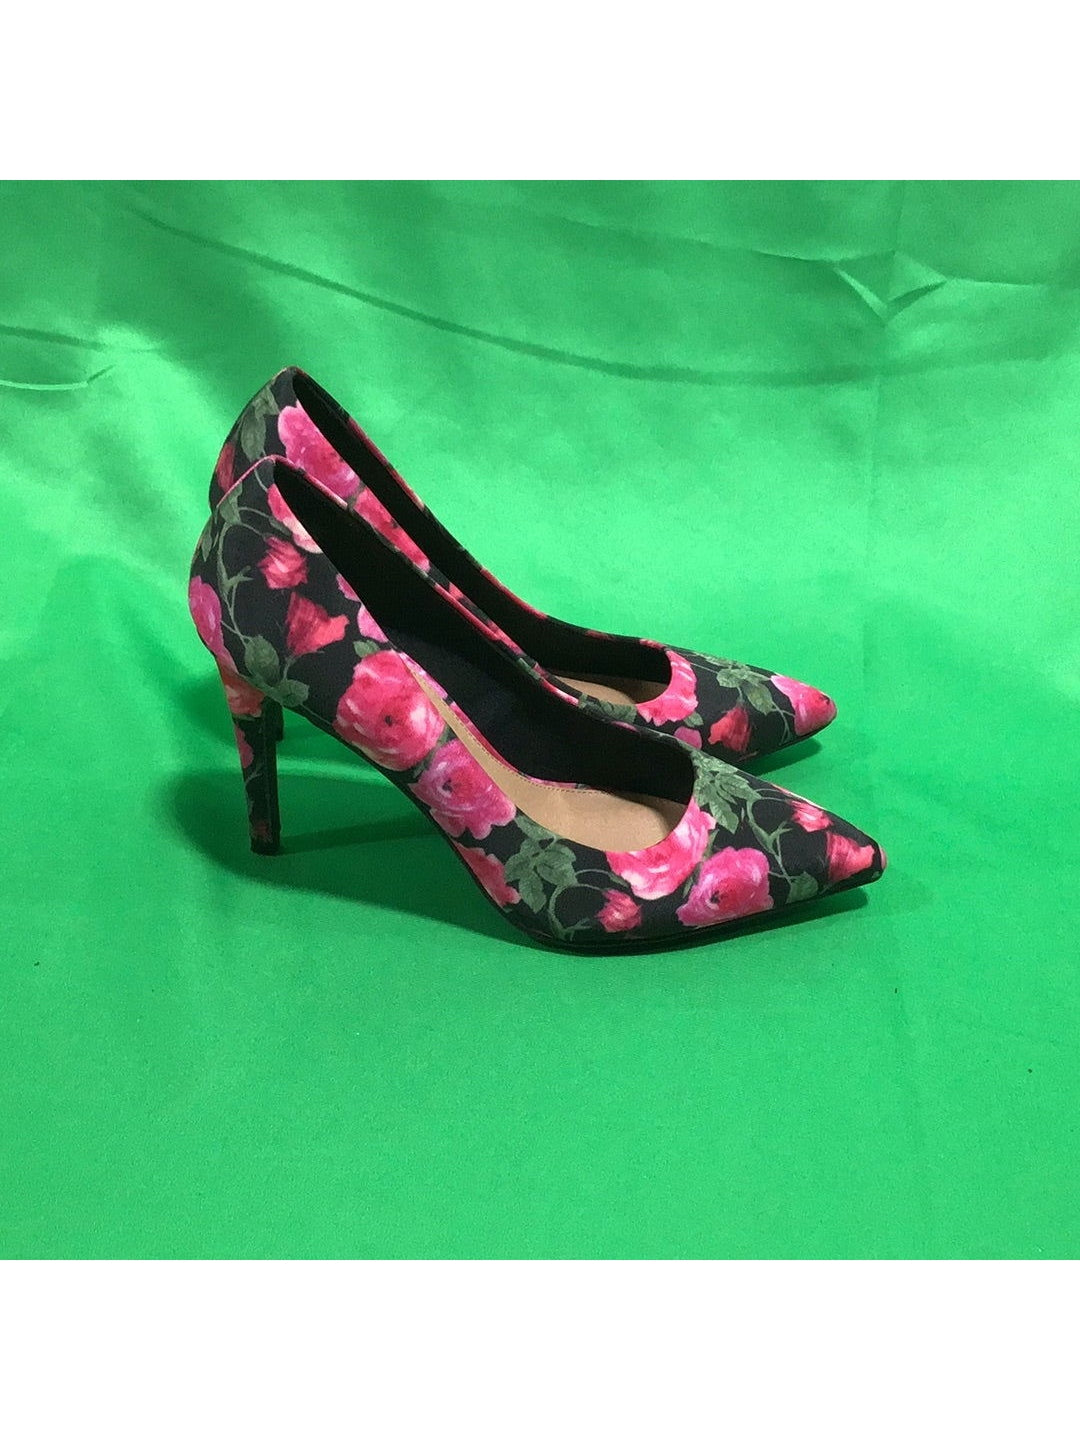 Christian Siriano 7 1/2 Flowers Print Heels - The Kennedy Collective Thrift - 